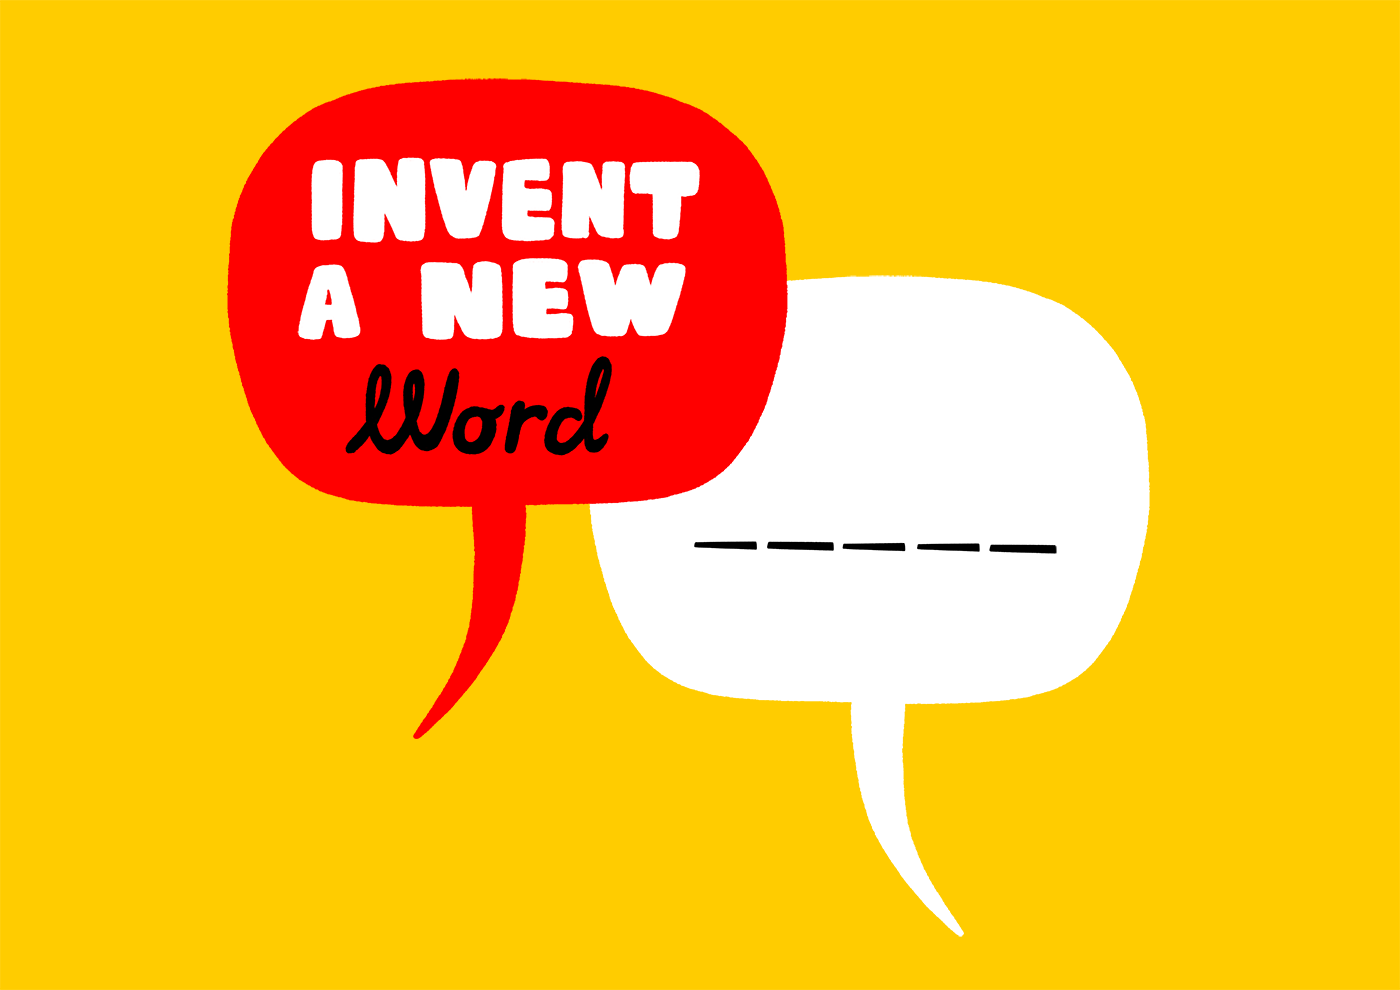 Invent a new word